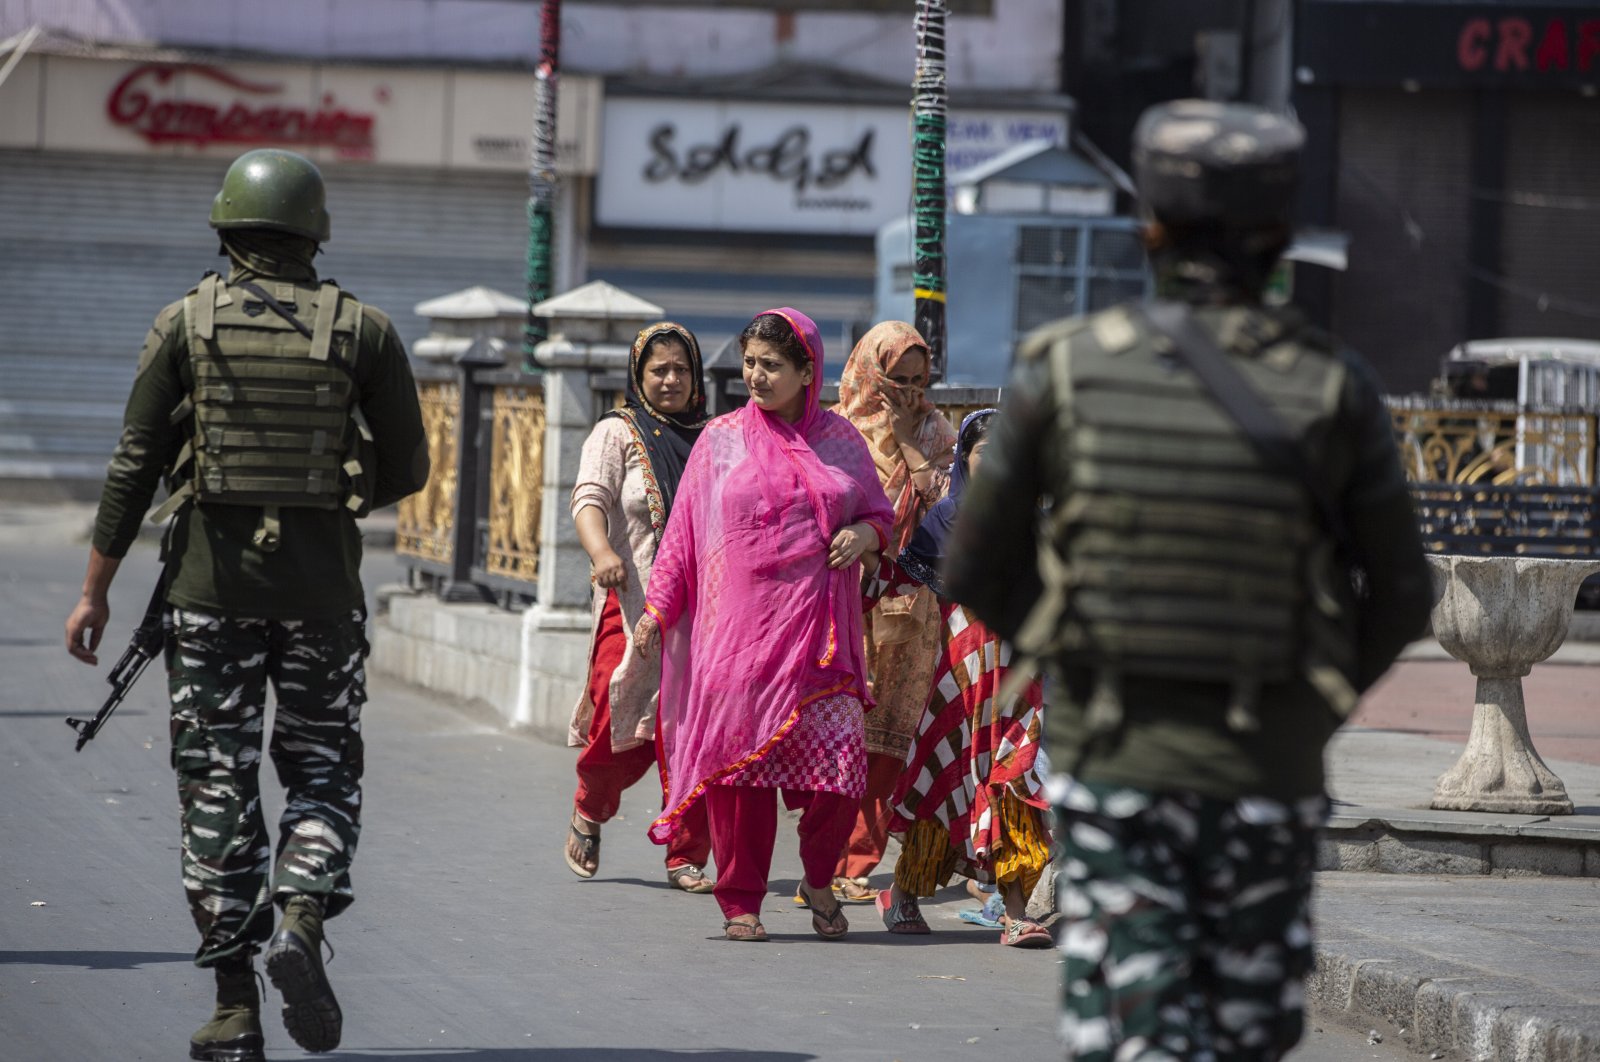 Indian paramilitary soldiers patrol as civilians walk in a deserted market area in Srinagar, Indian-controlled Kashmir, Sept. 2, 2021. (AP Photo)